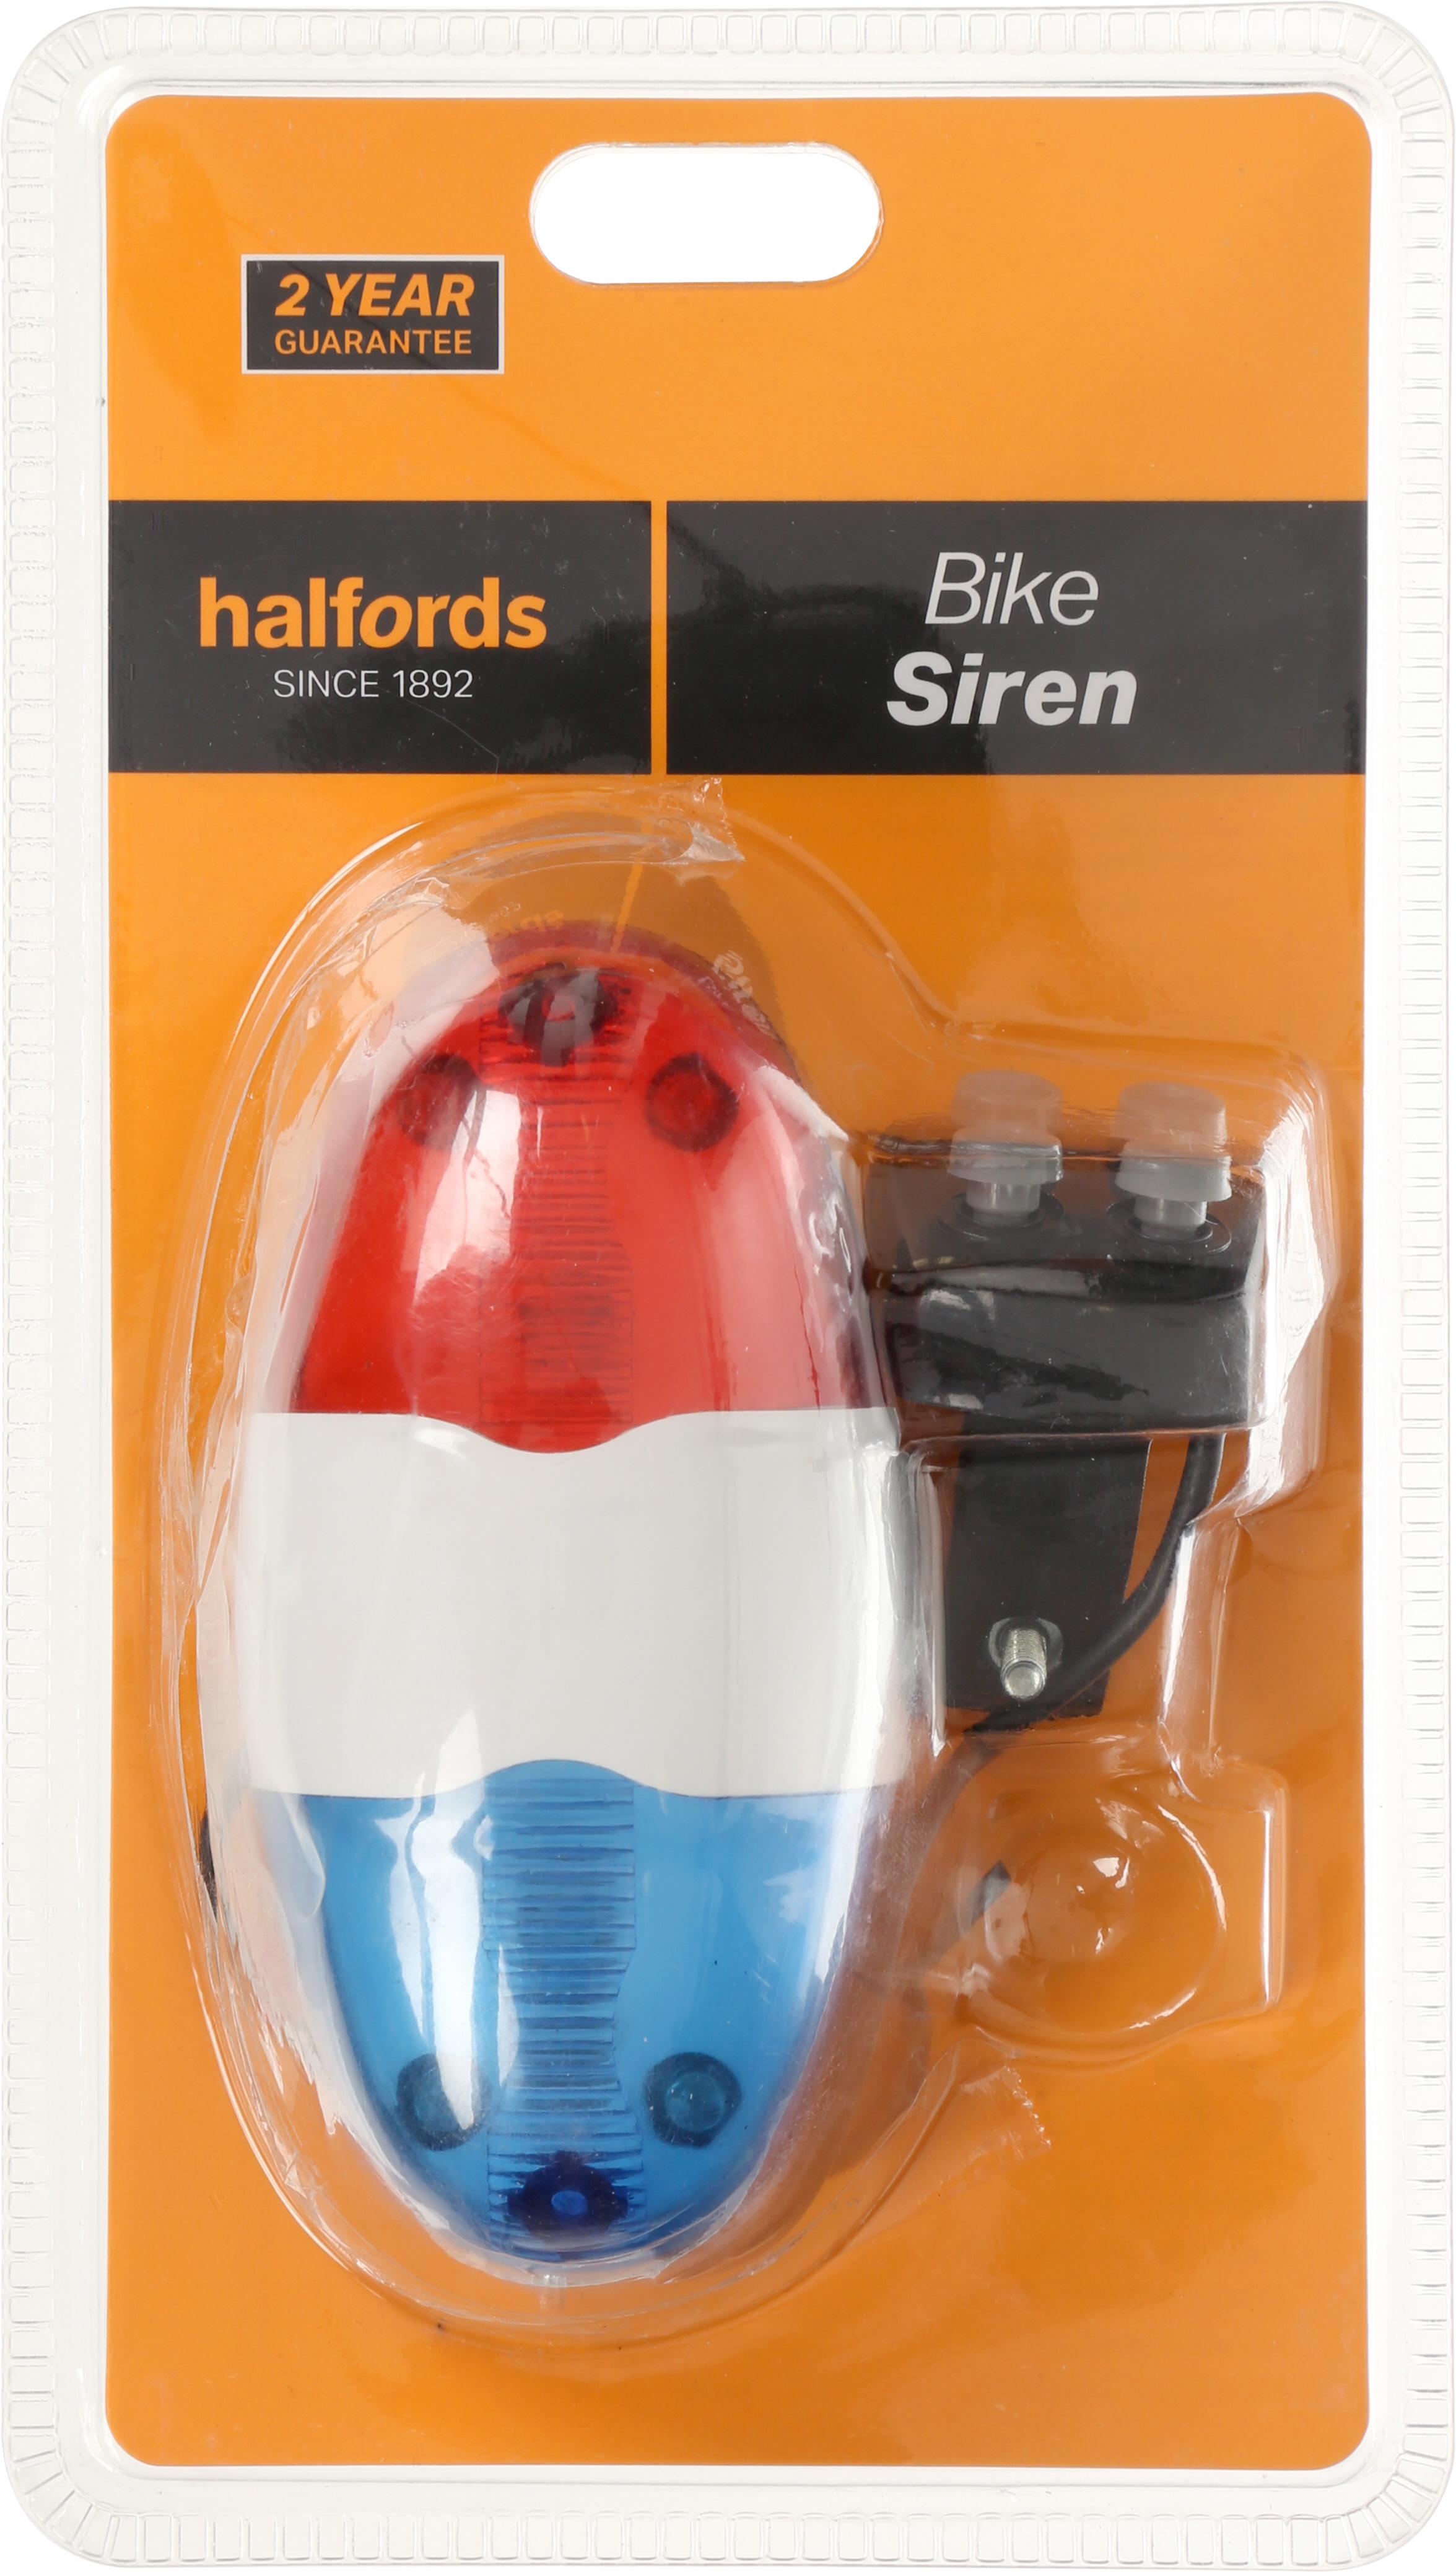 Halfords Kids Bikes With Best Deals, Sales, Cheapest Prices and Best ...